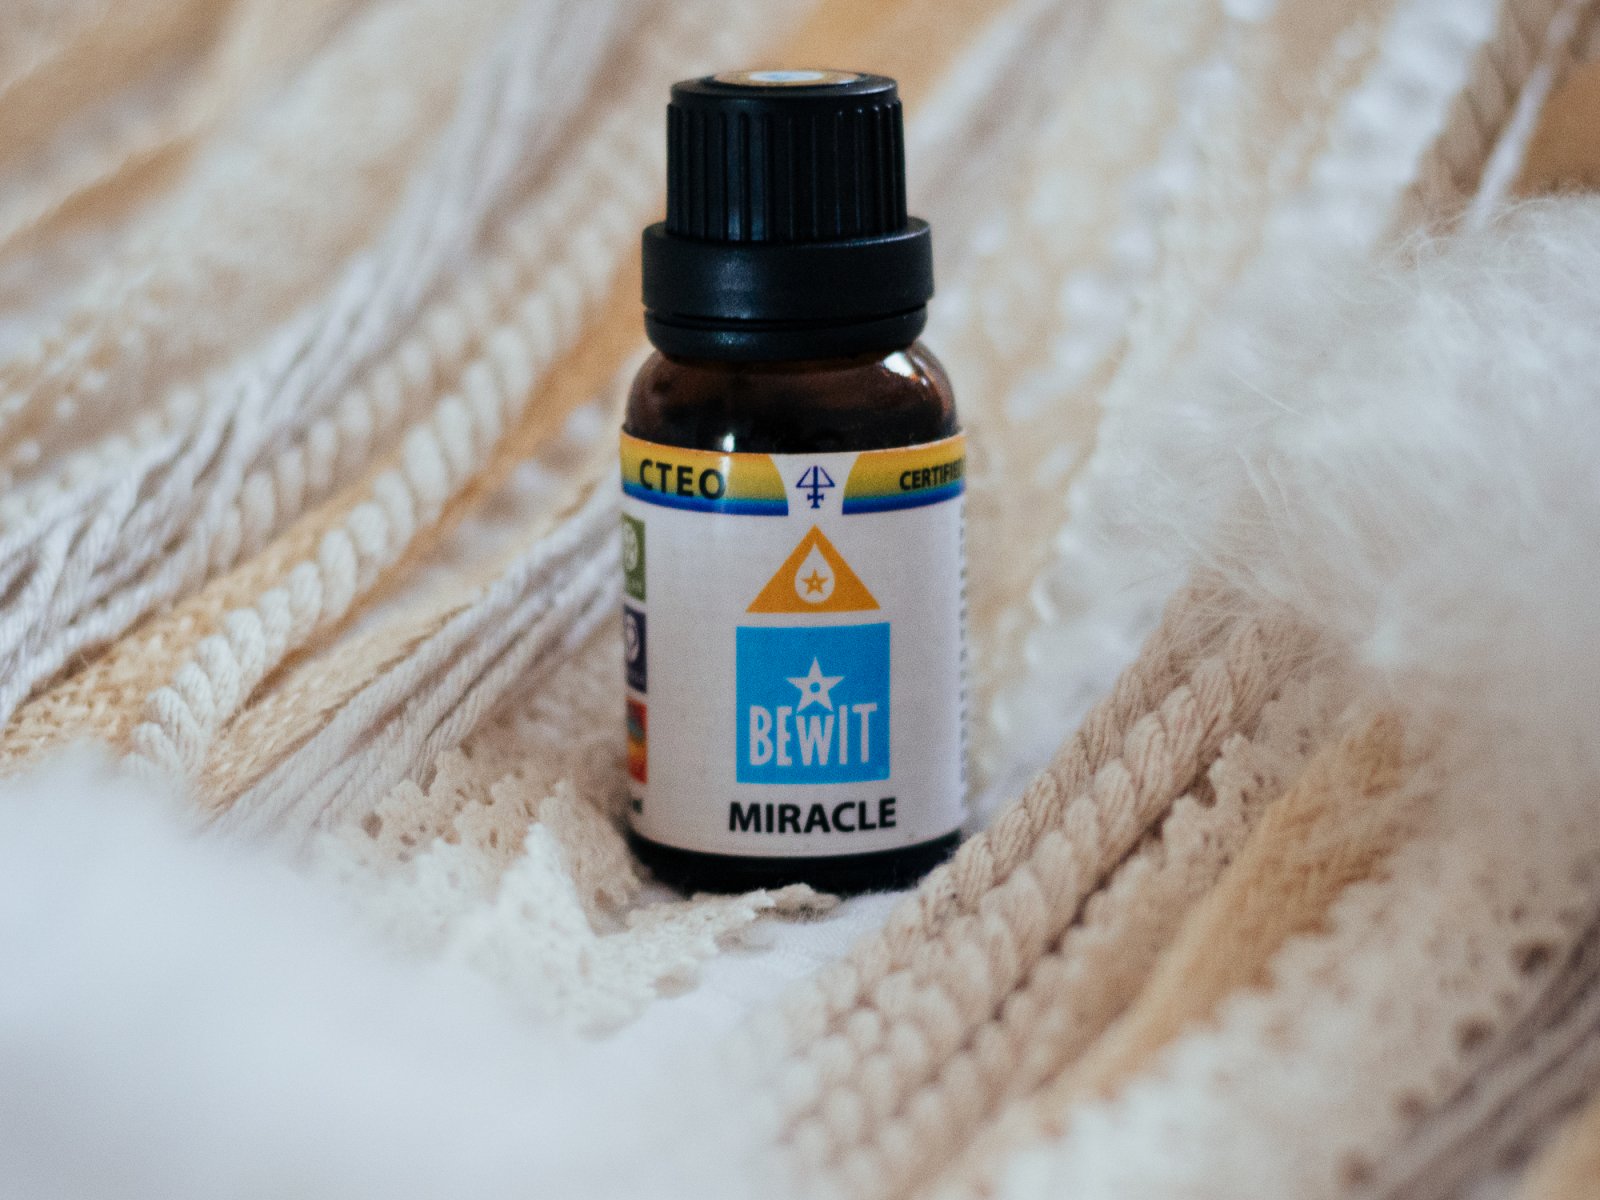 BEWIT MIRACLE - A unique blend of the essential oils - 4